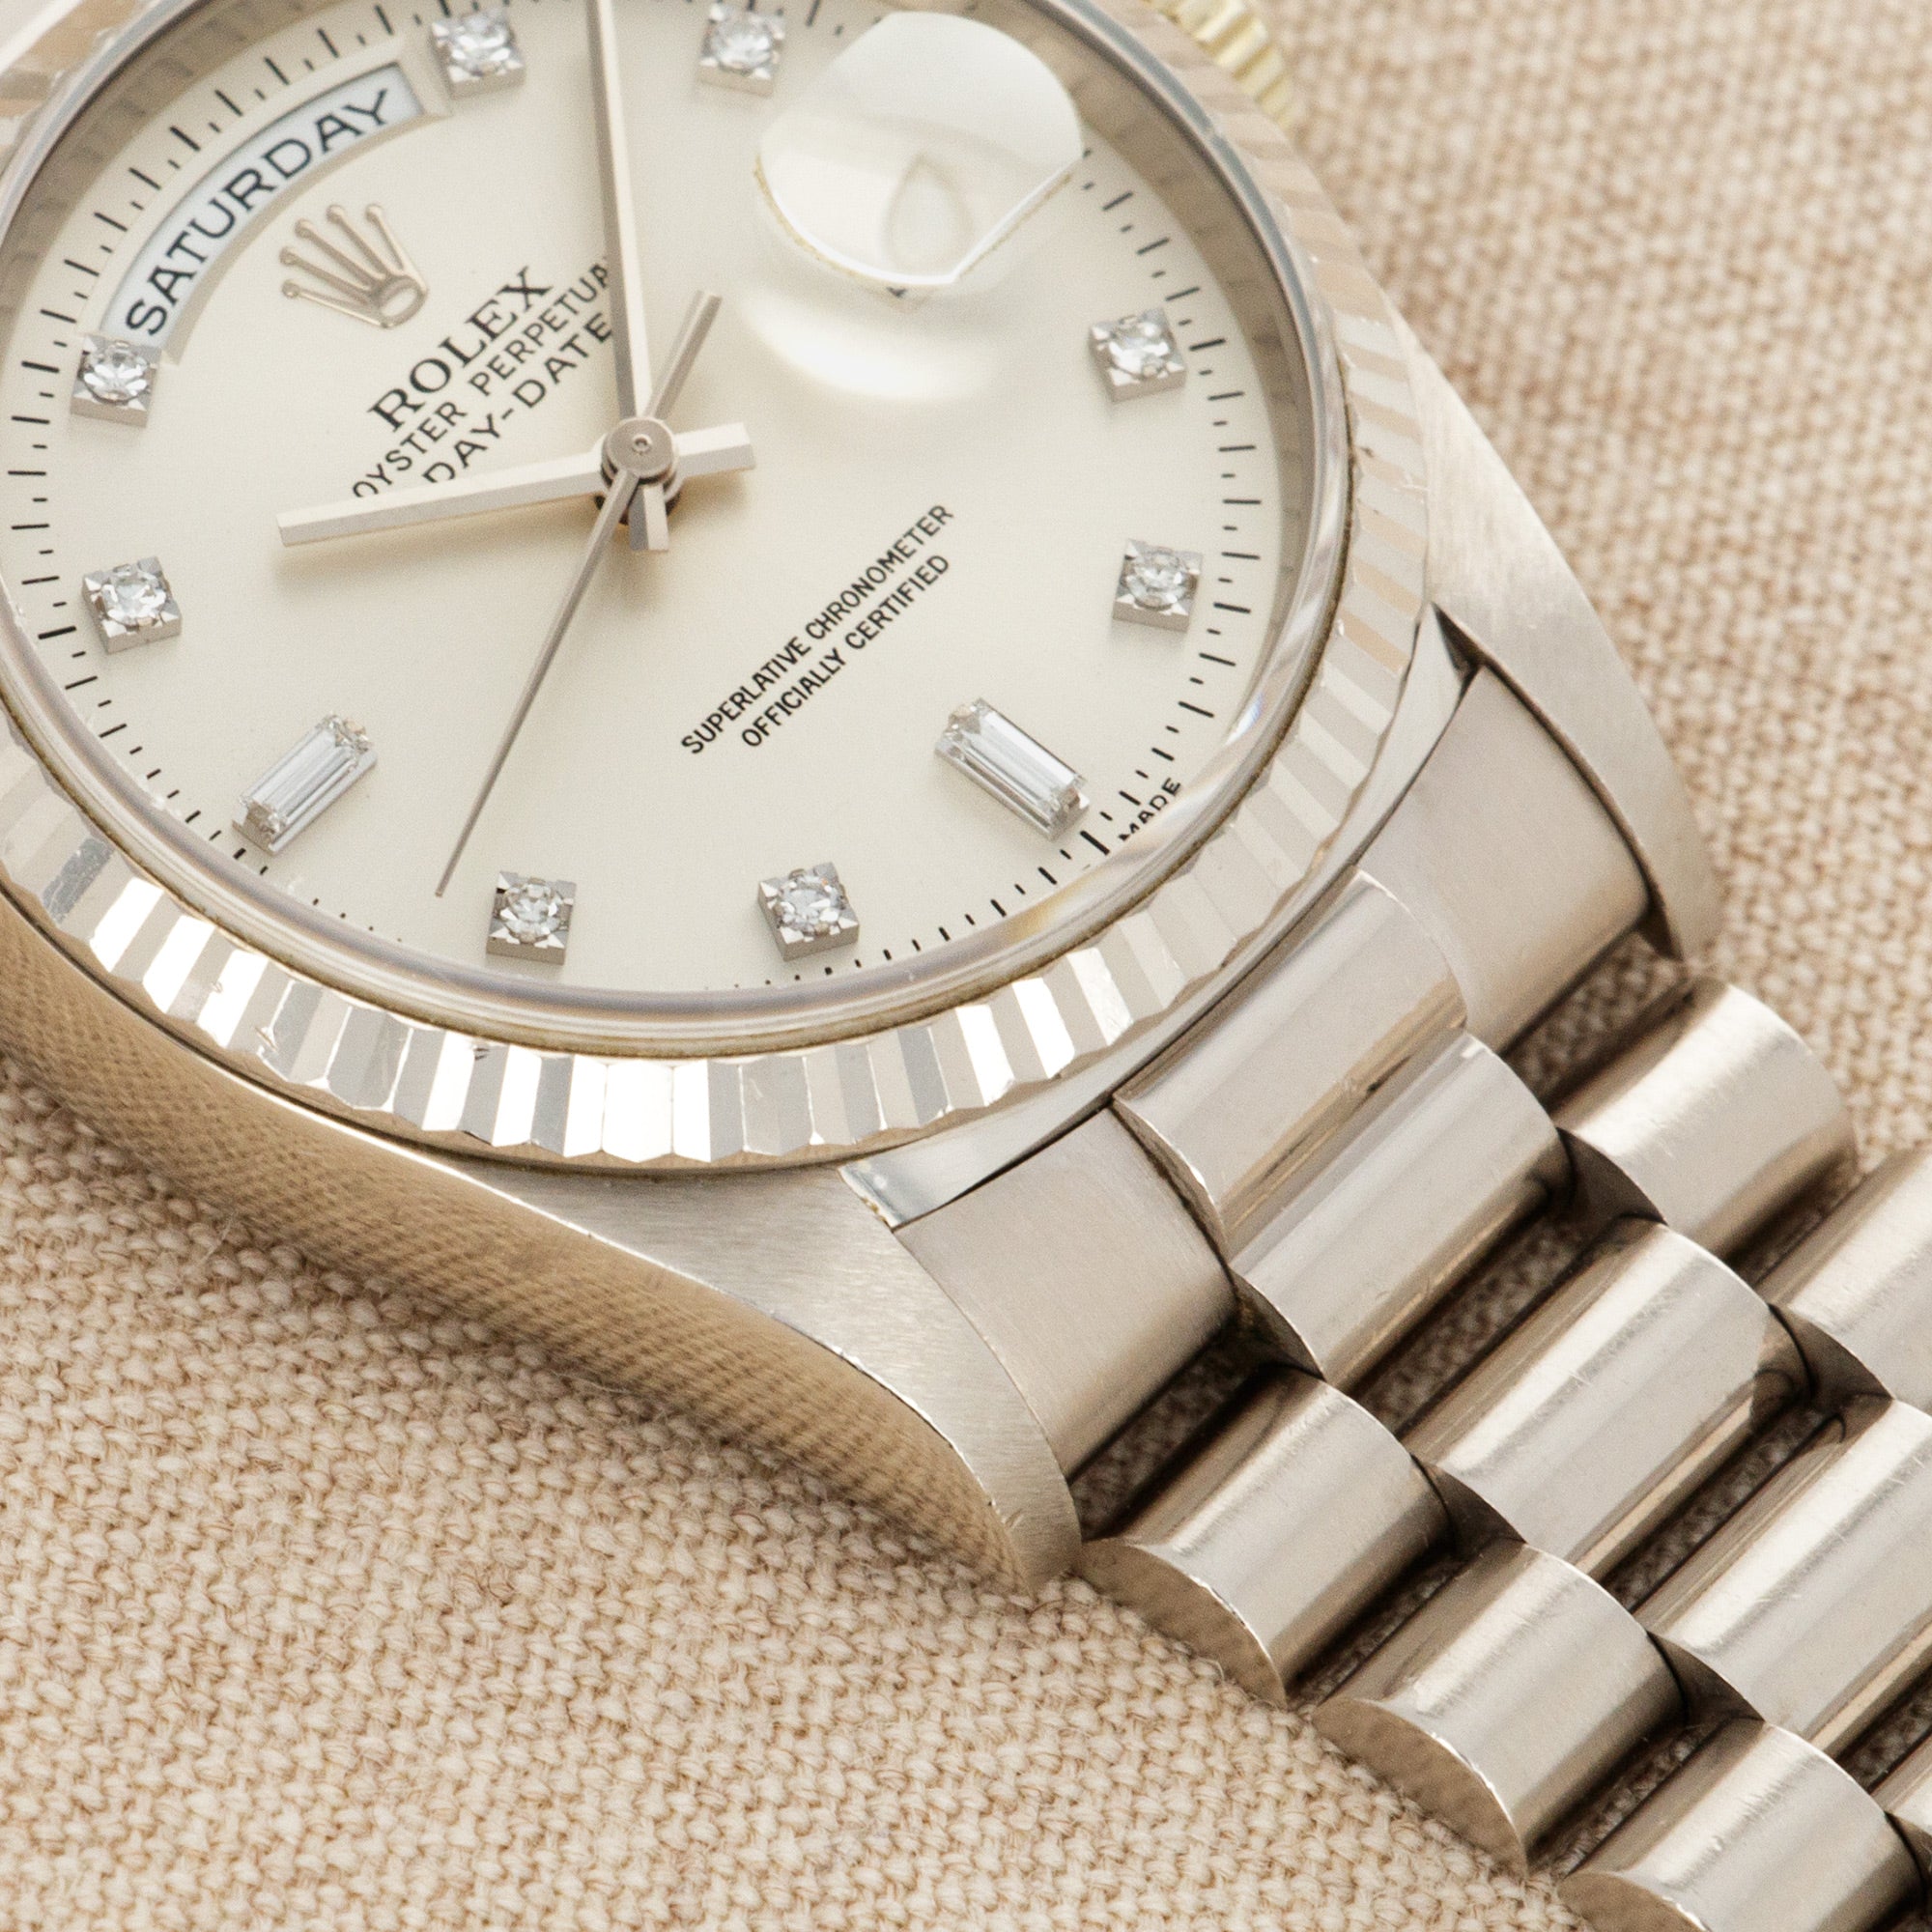 Rolex - Rolex White Gold Day-Date Ref. 18239 with Diamond Markers - The Keystone Watches